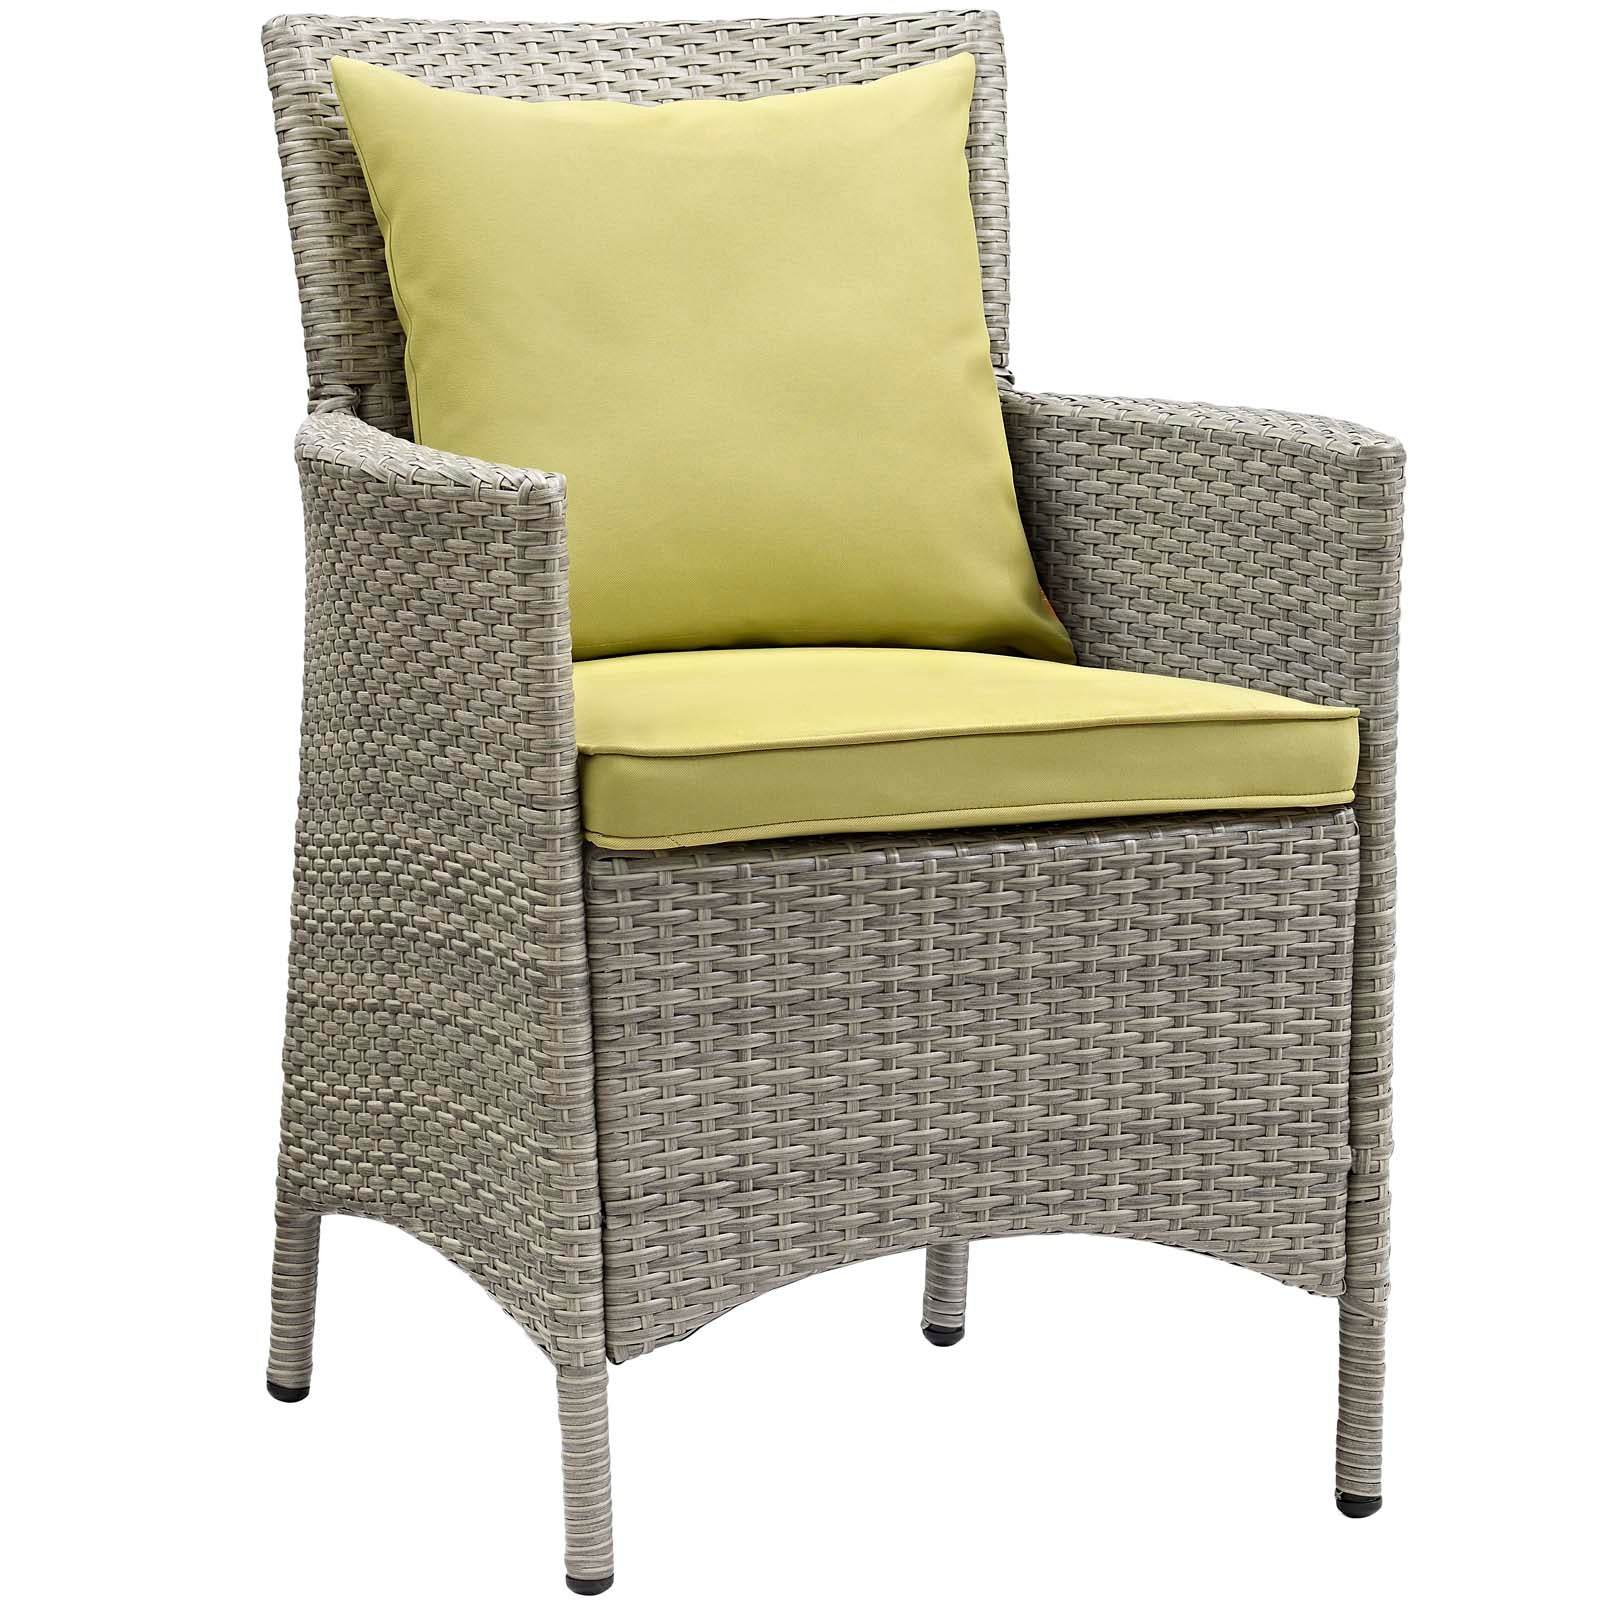 Modway Outdoor Dining Chairs - Conduit Outdoor Patio Wicker Rattan Dining Armchair Light Gray Peridot